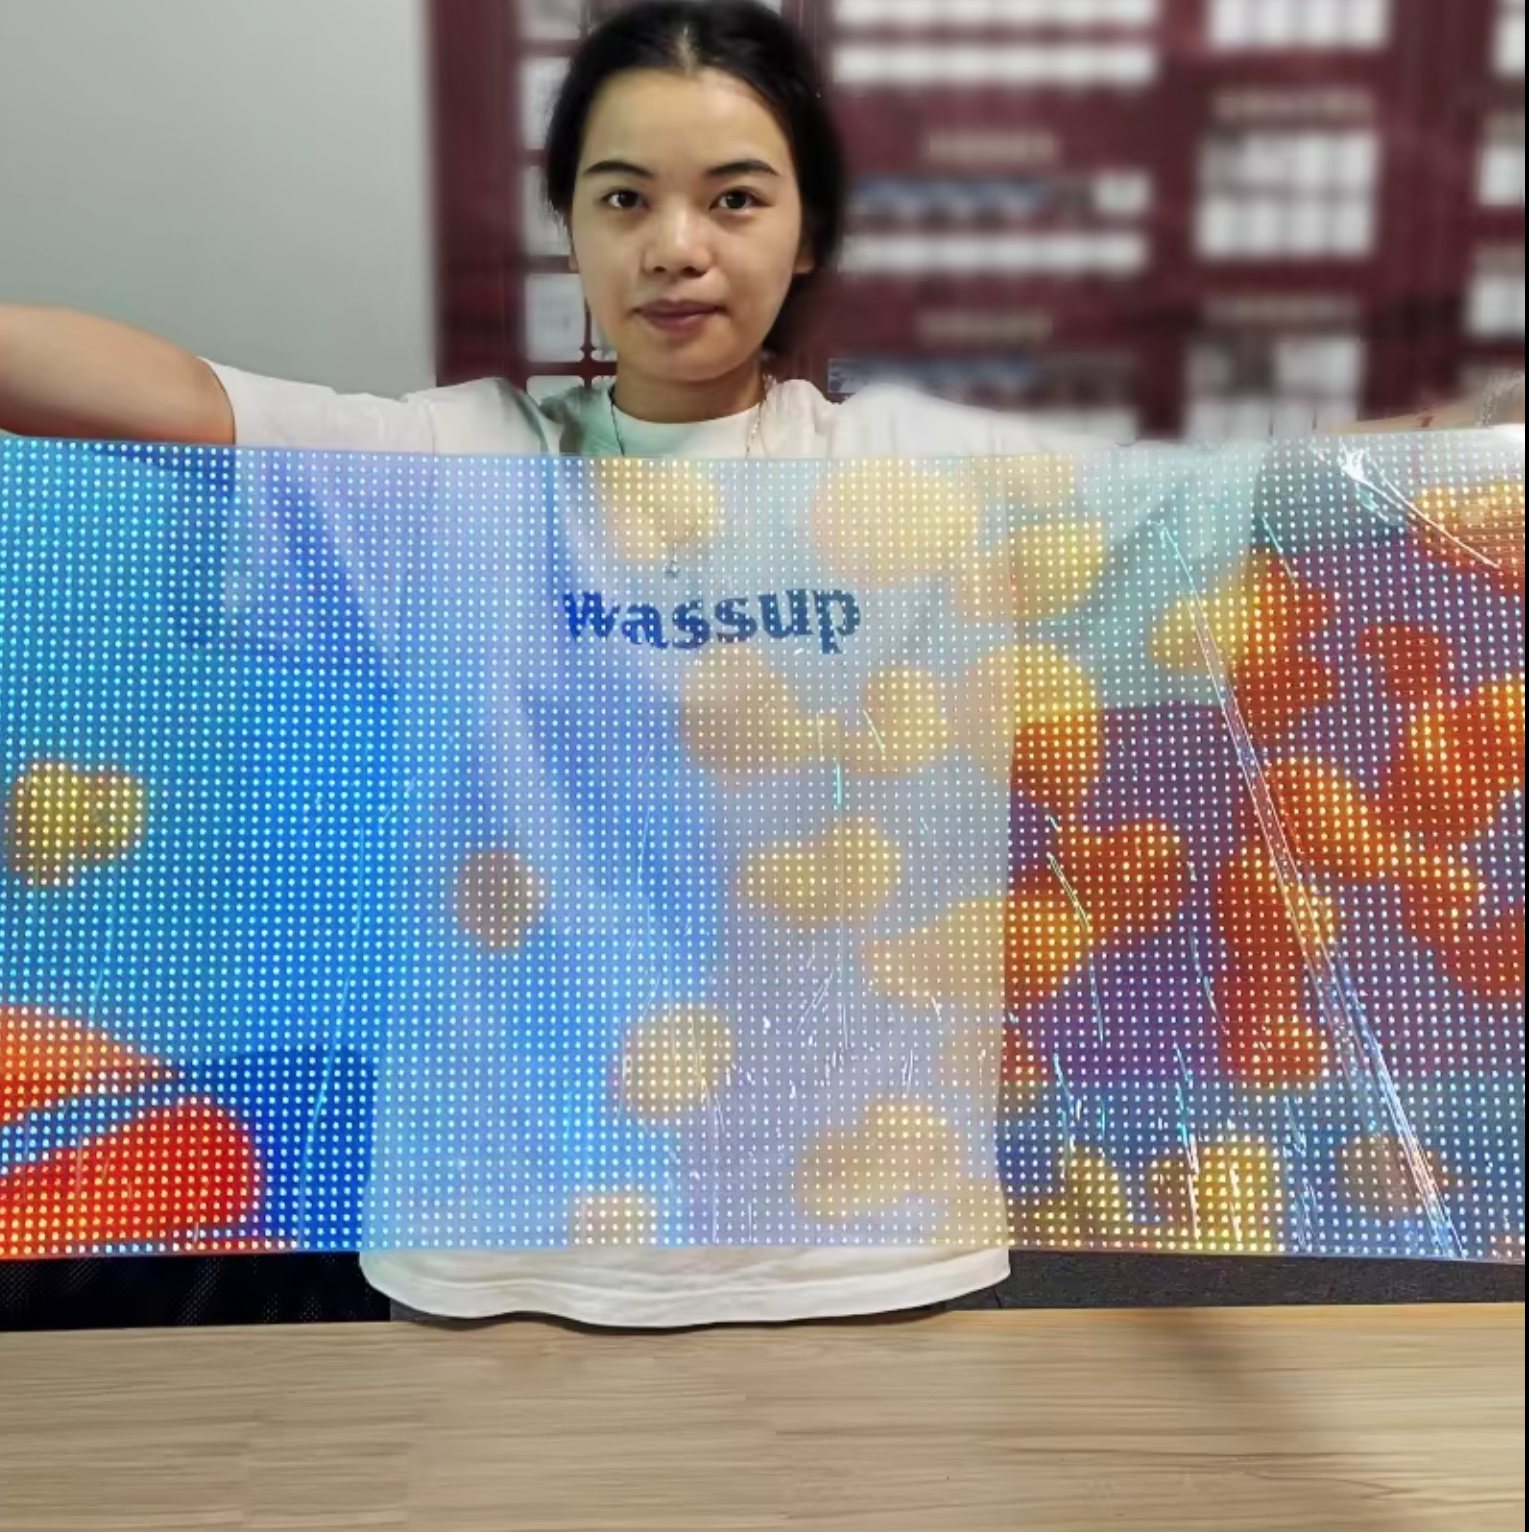 P6 P8 P10 Flexible Adhesive ultra-thin Transparent LED video Film displays for storefront.